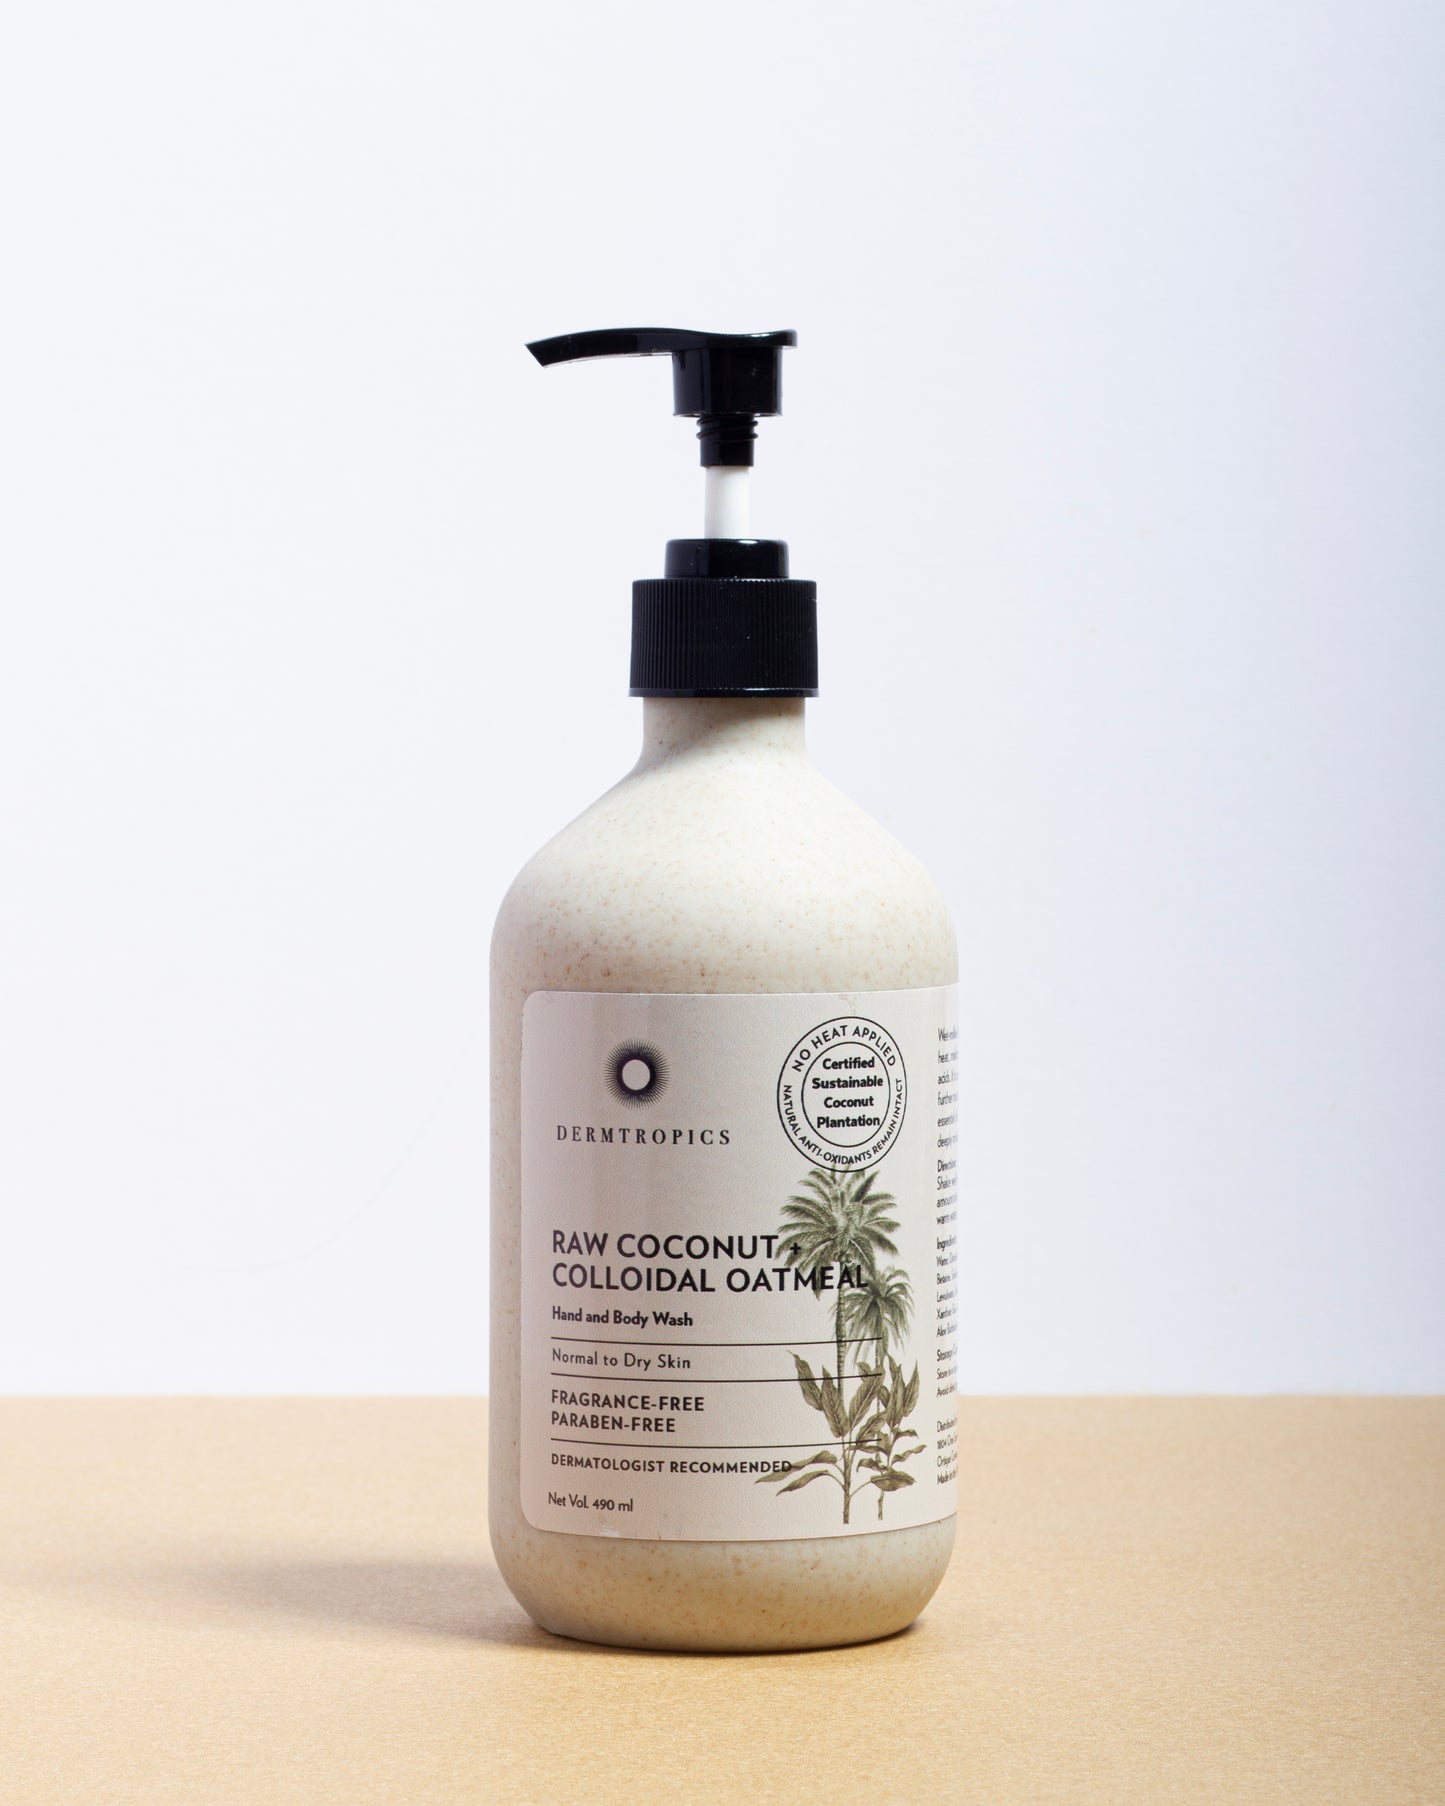 NEW - Raw Coconut + Colloidal Oatmeal Hand and Body Wash